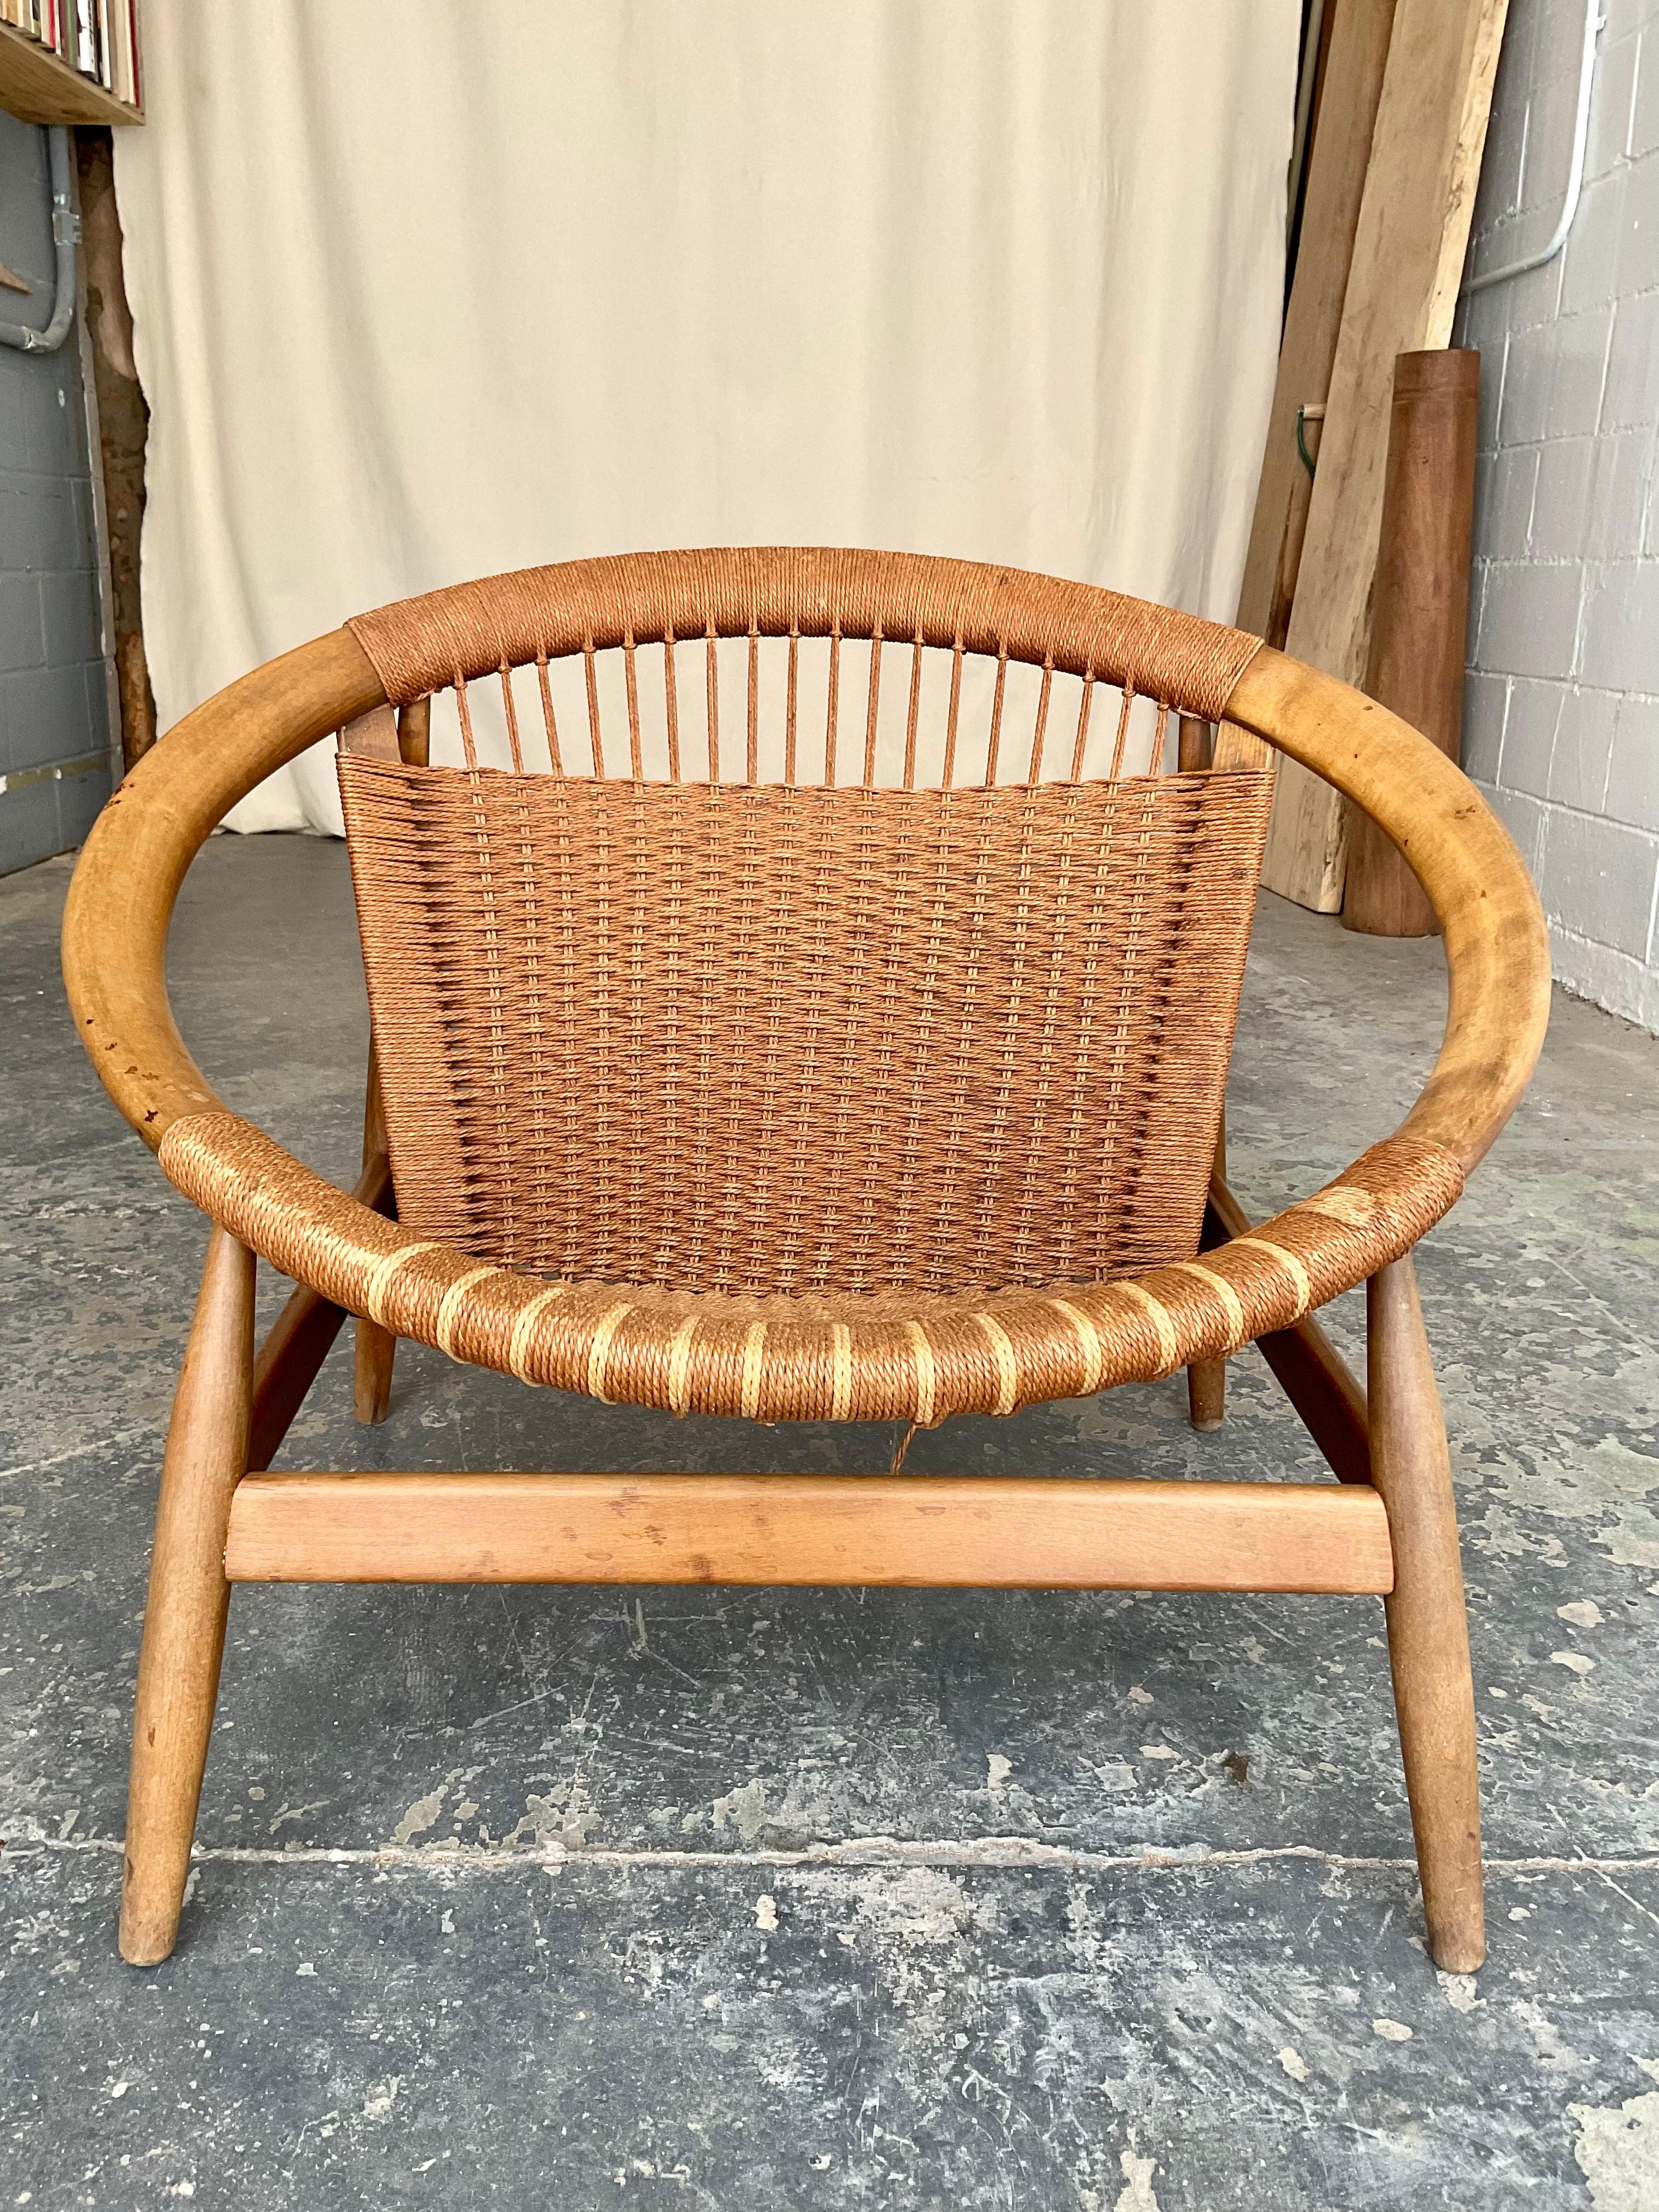 Mid-20th Century “Ringstol” by Illum Wiikkelsø for Niels Eilersen in Beechwood and Cord, 1950s For Sale